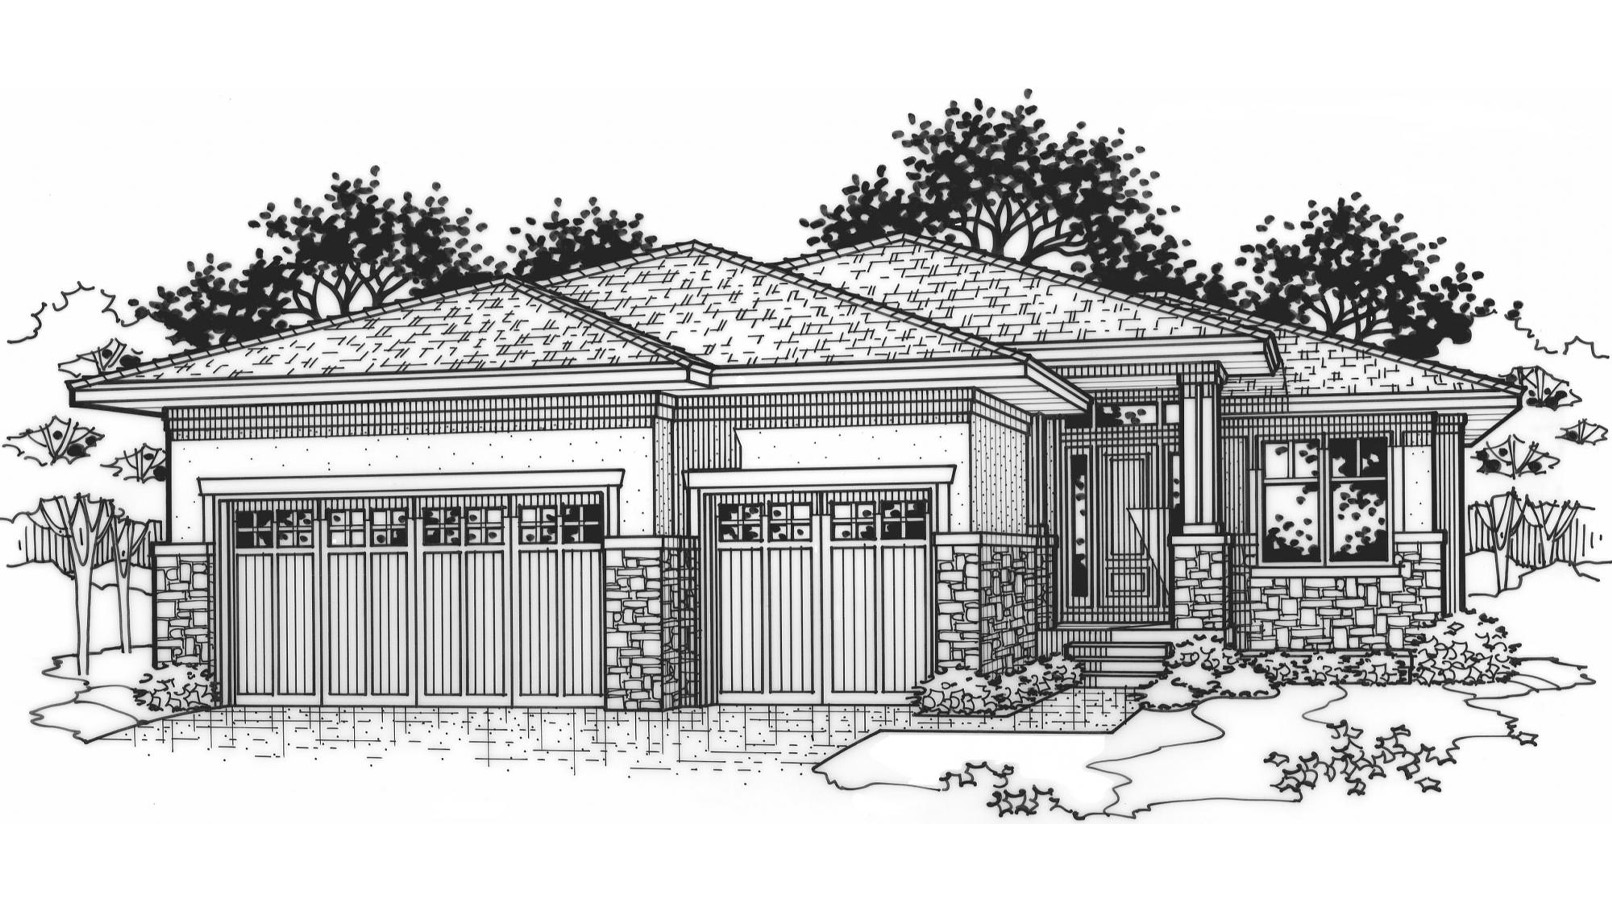 Black and white front elevation of the Augusta model from Lambie Homes